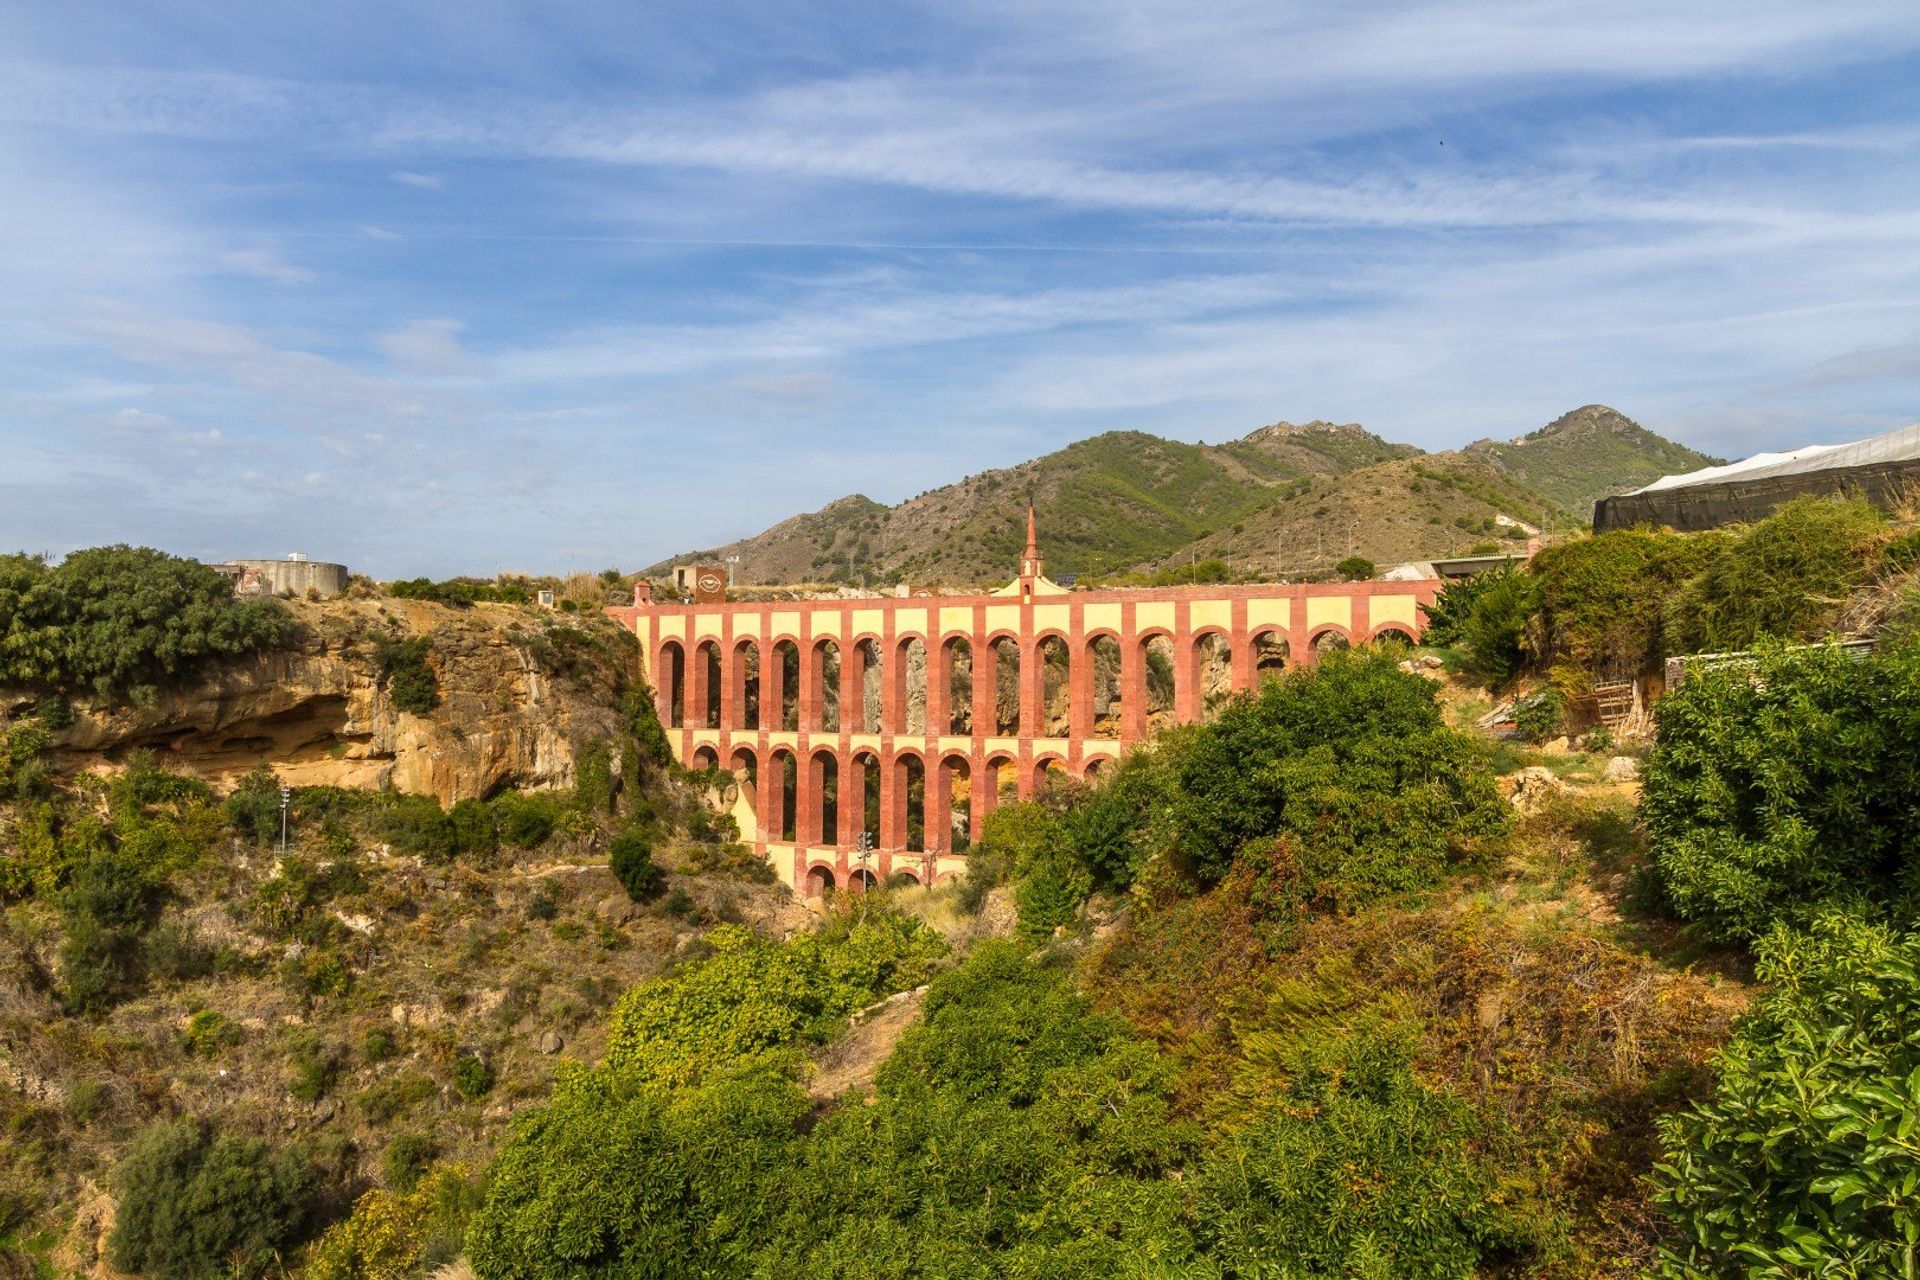 The 19th Century Eagle Aqueduct, a historic jewel of Spanish architecture, south west of Nerja